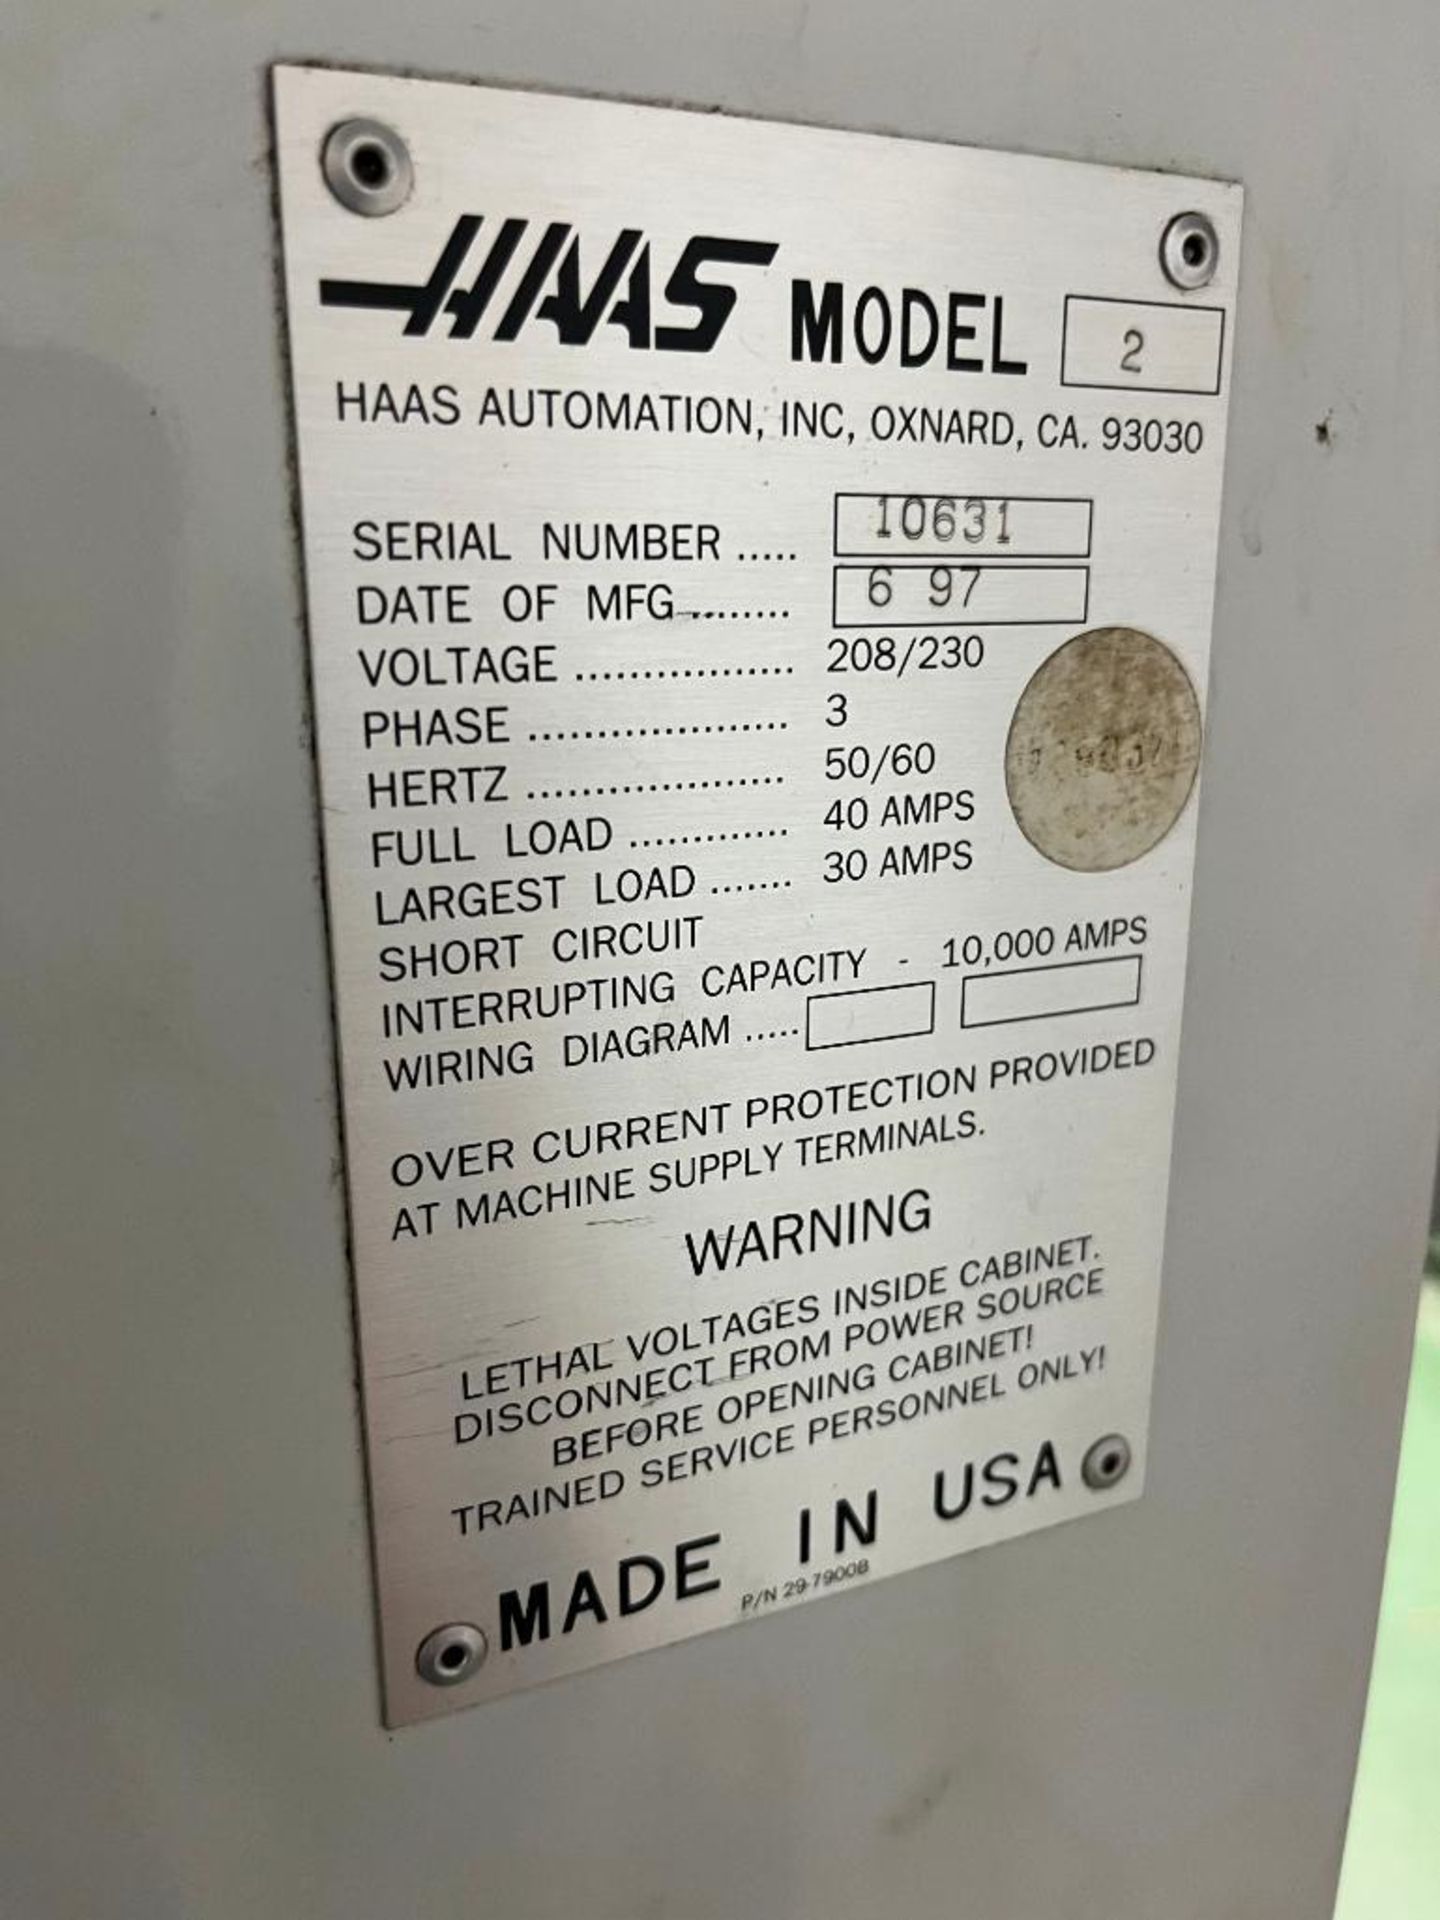 1997 Haas 4th Axis Vertical Machining Center, Model VF-2, S/N 10631, 3-Phase, 230 Volt, 36" X 14" Ta - Image 11 of 11